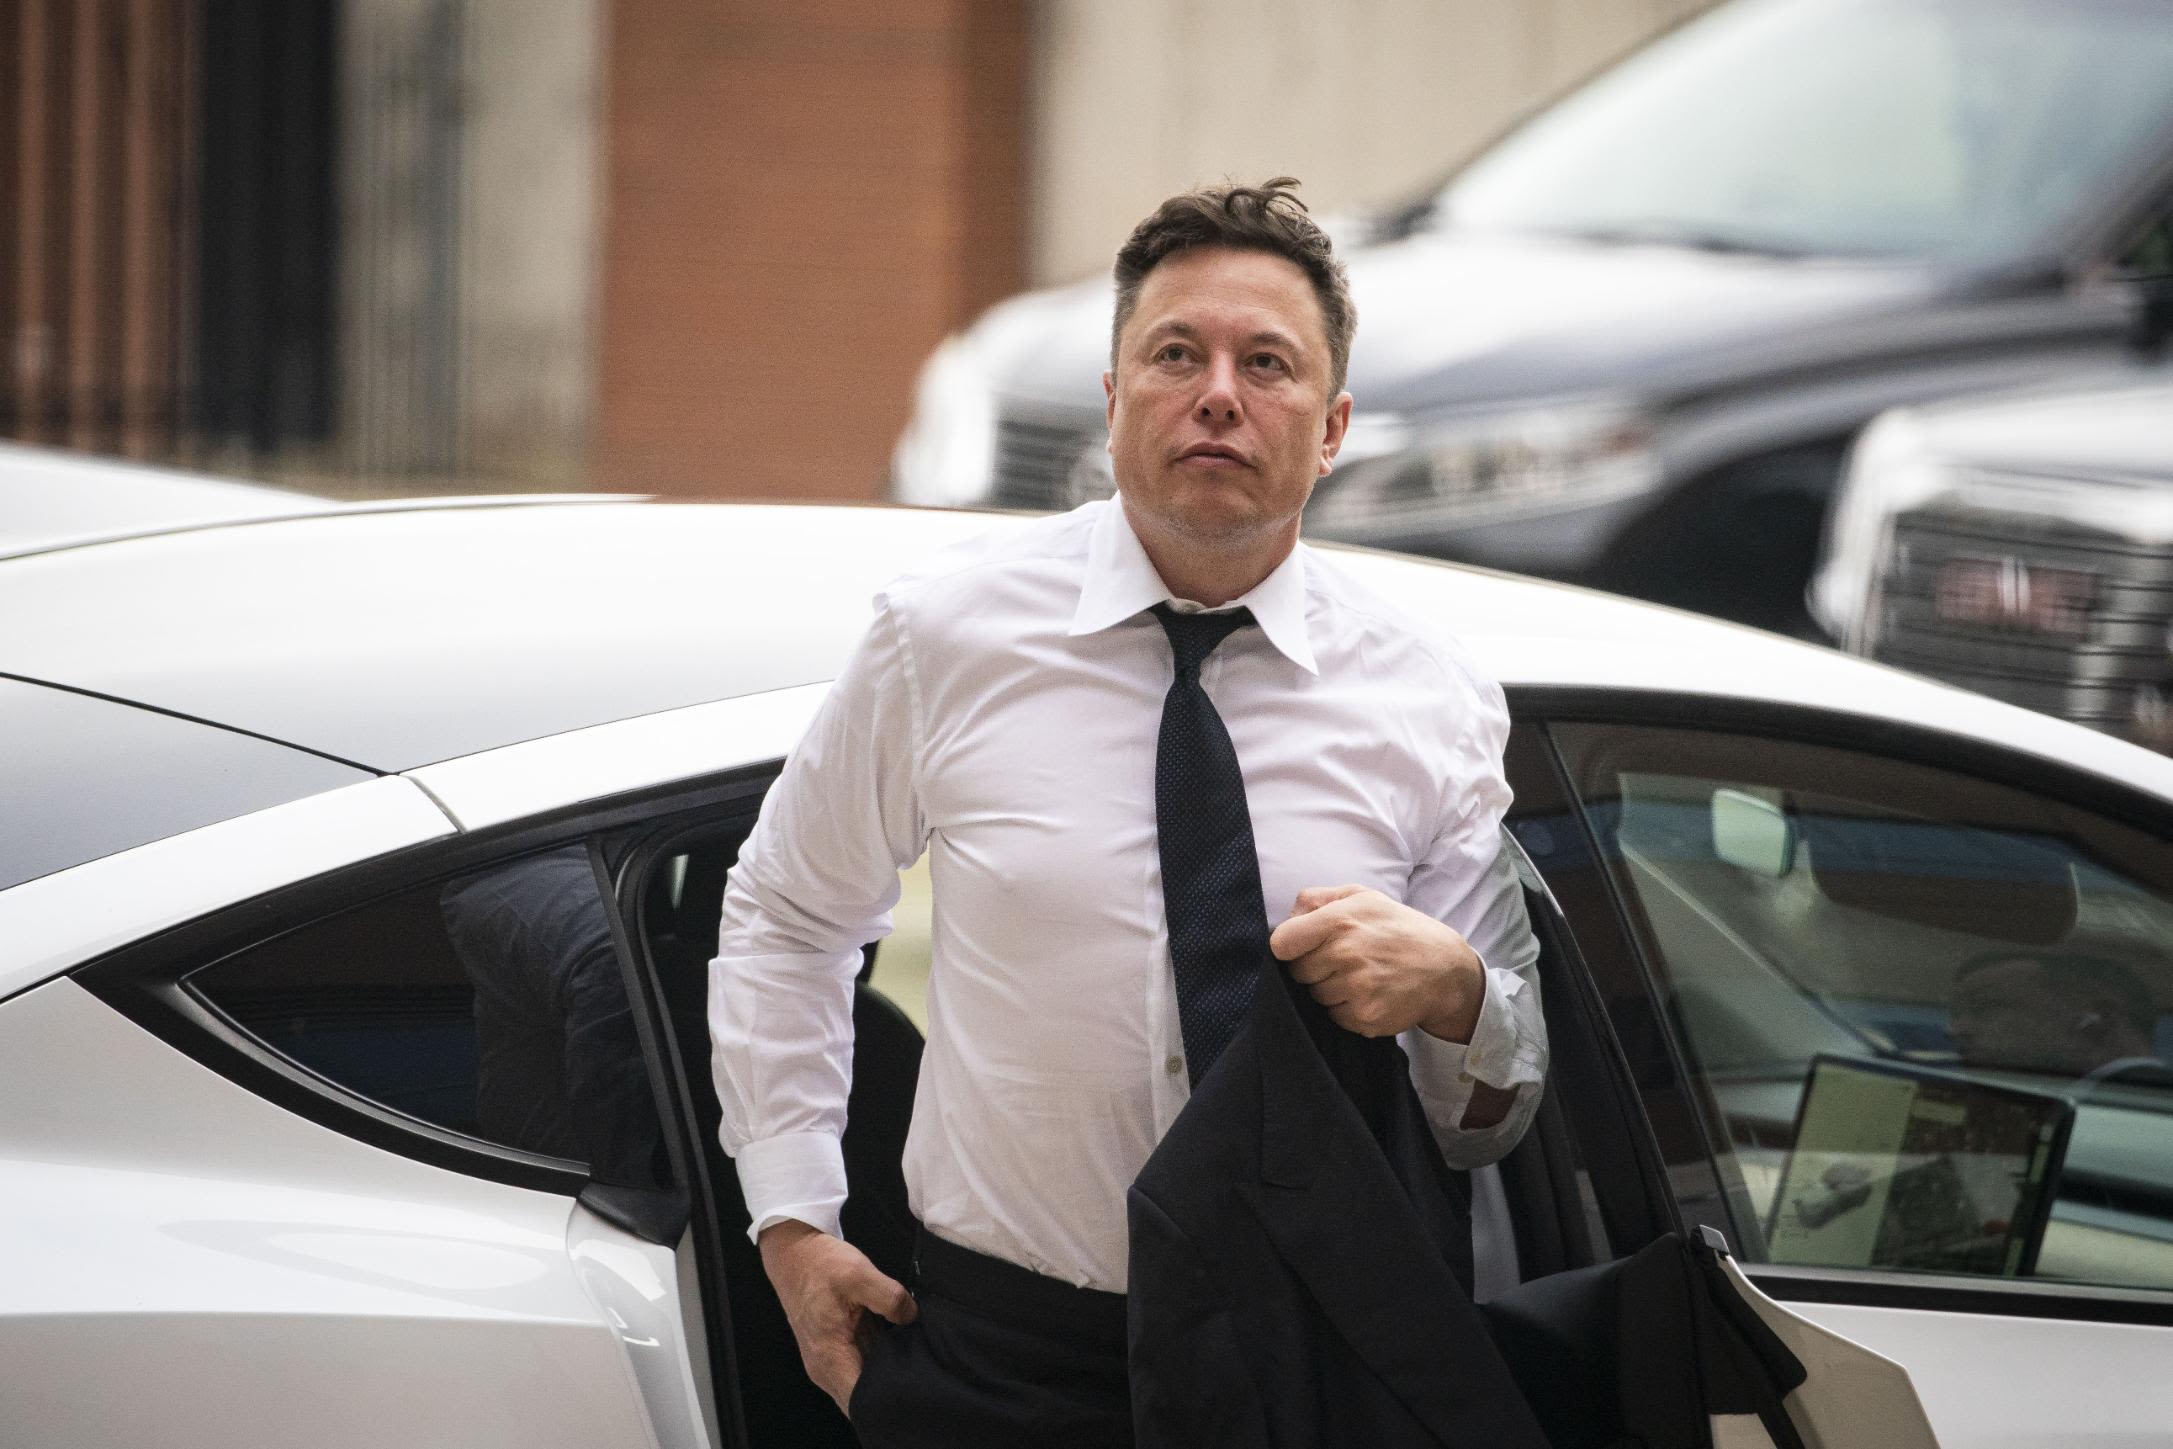 Elon Musk, World's Richest Person, is Busy Rick-rolling the